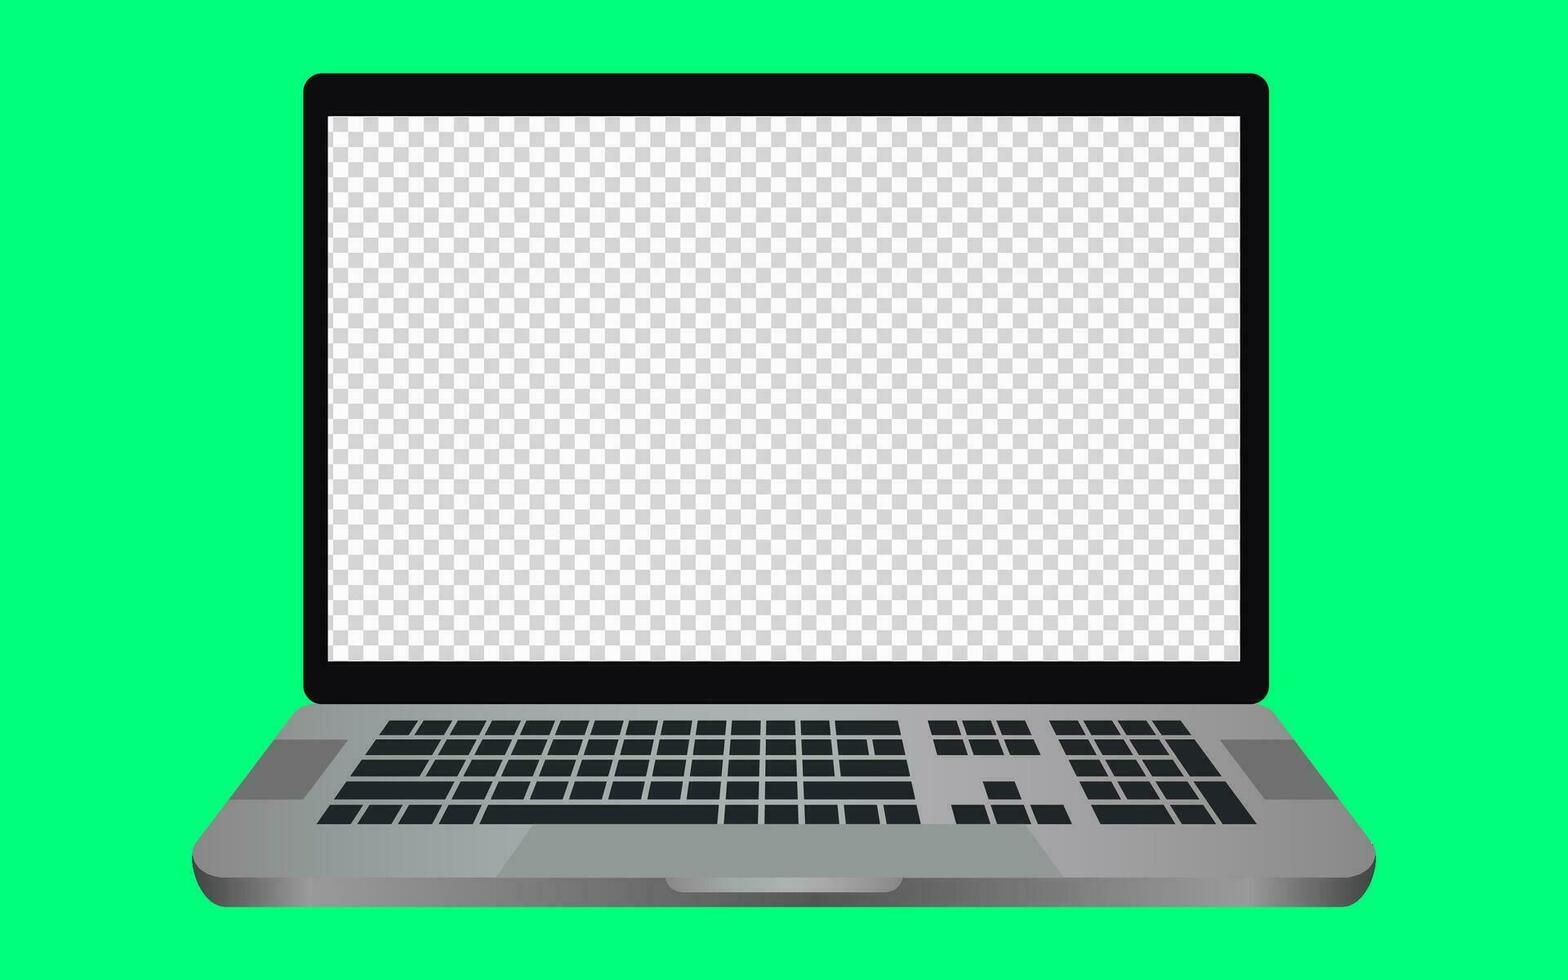 Laptop with a blank screen with a white background. mockups template design, vector illustration elements.